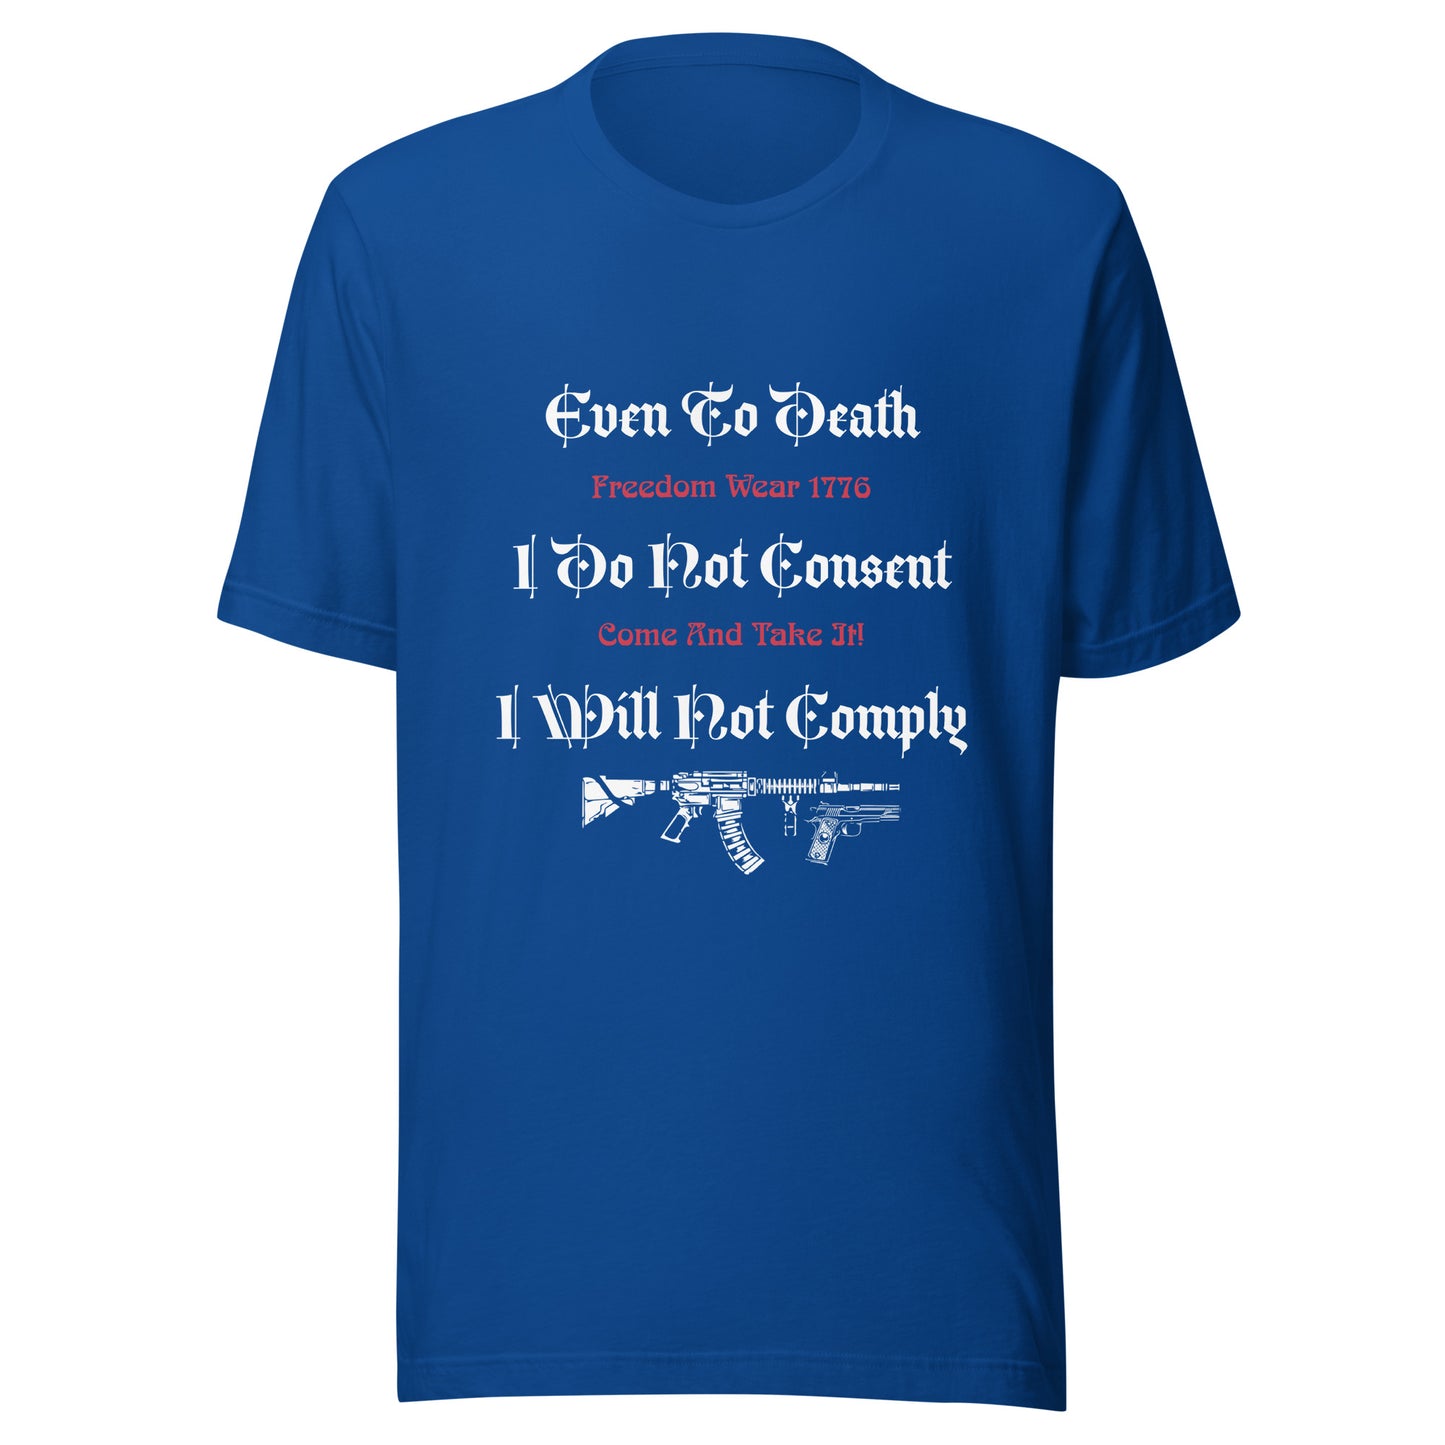 I Will Not Comply Tee-Shirt